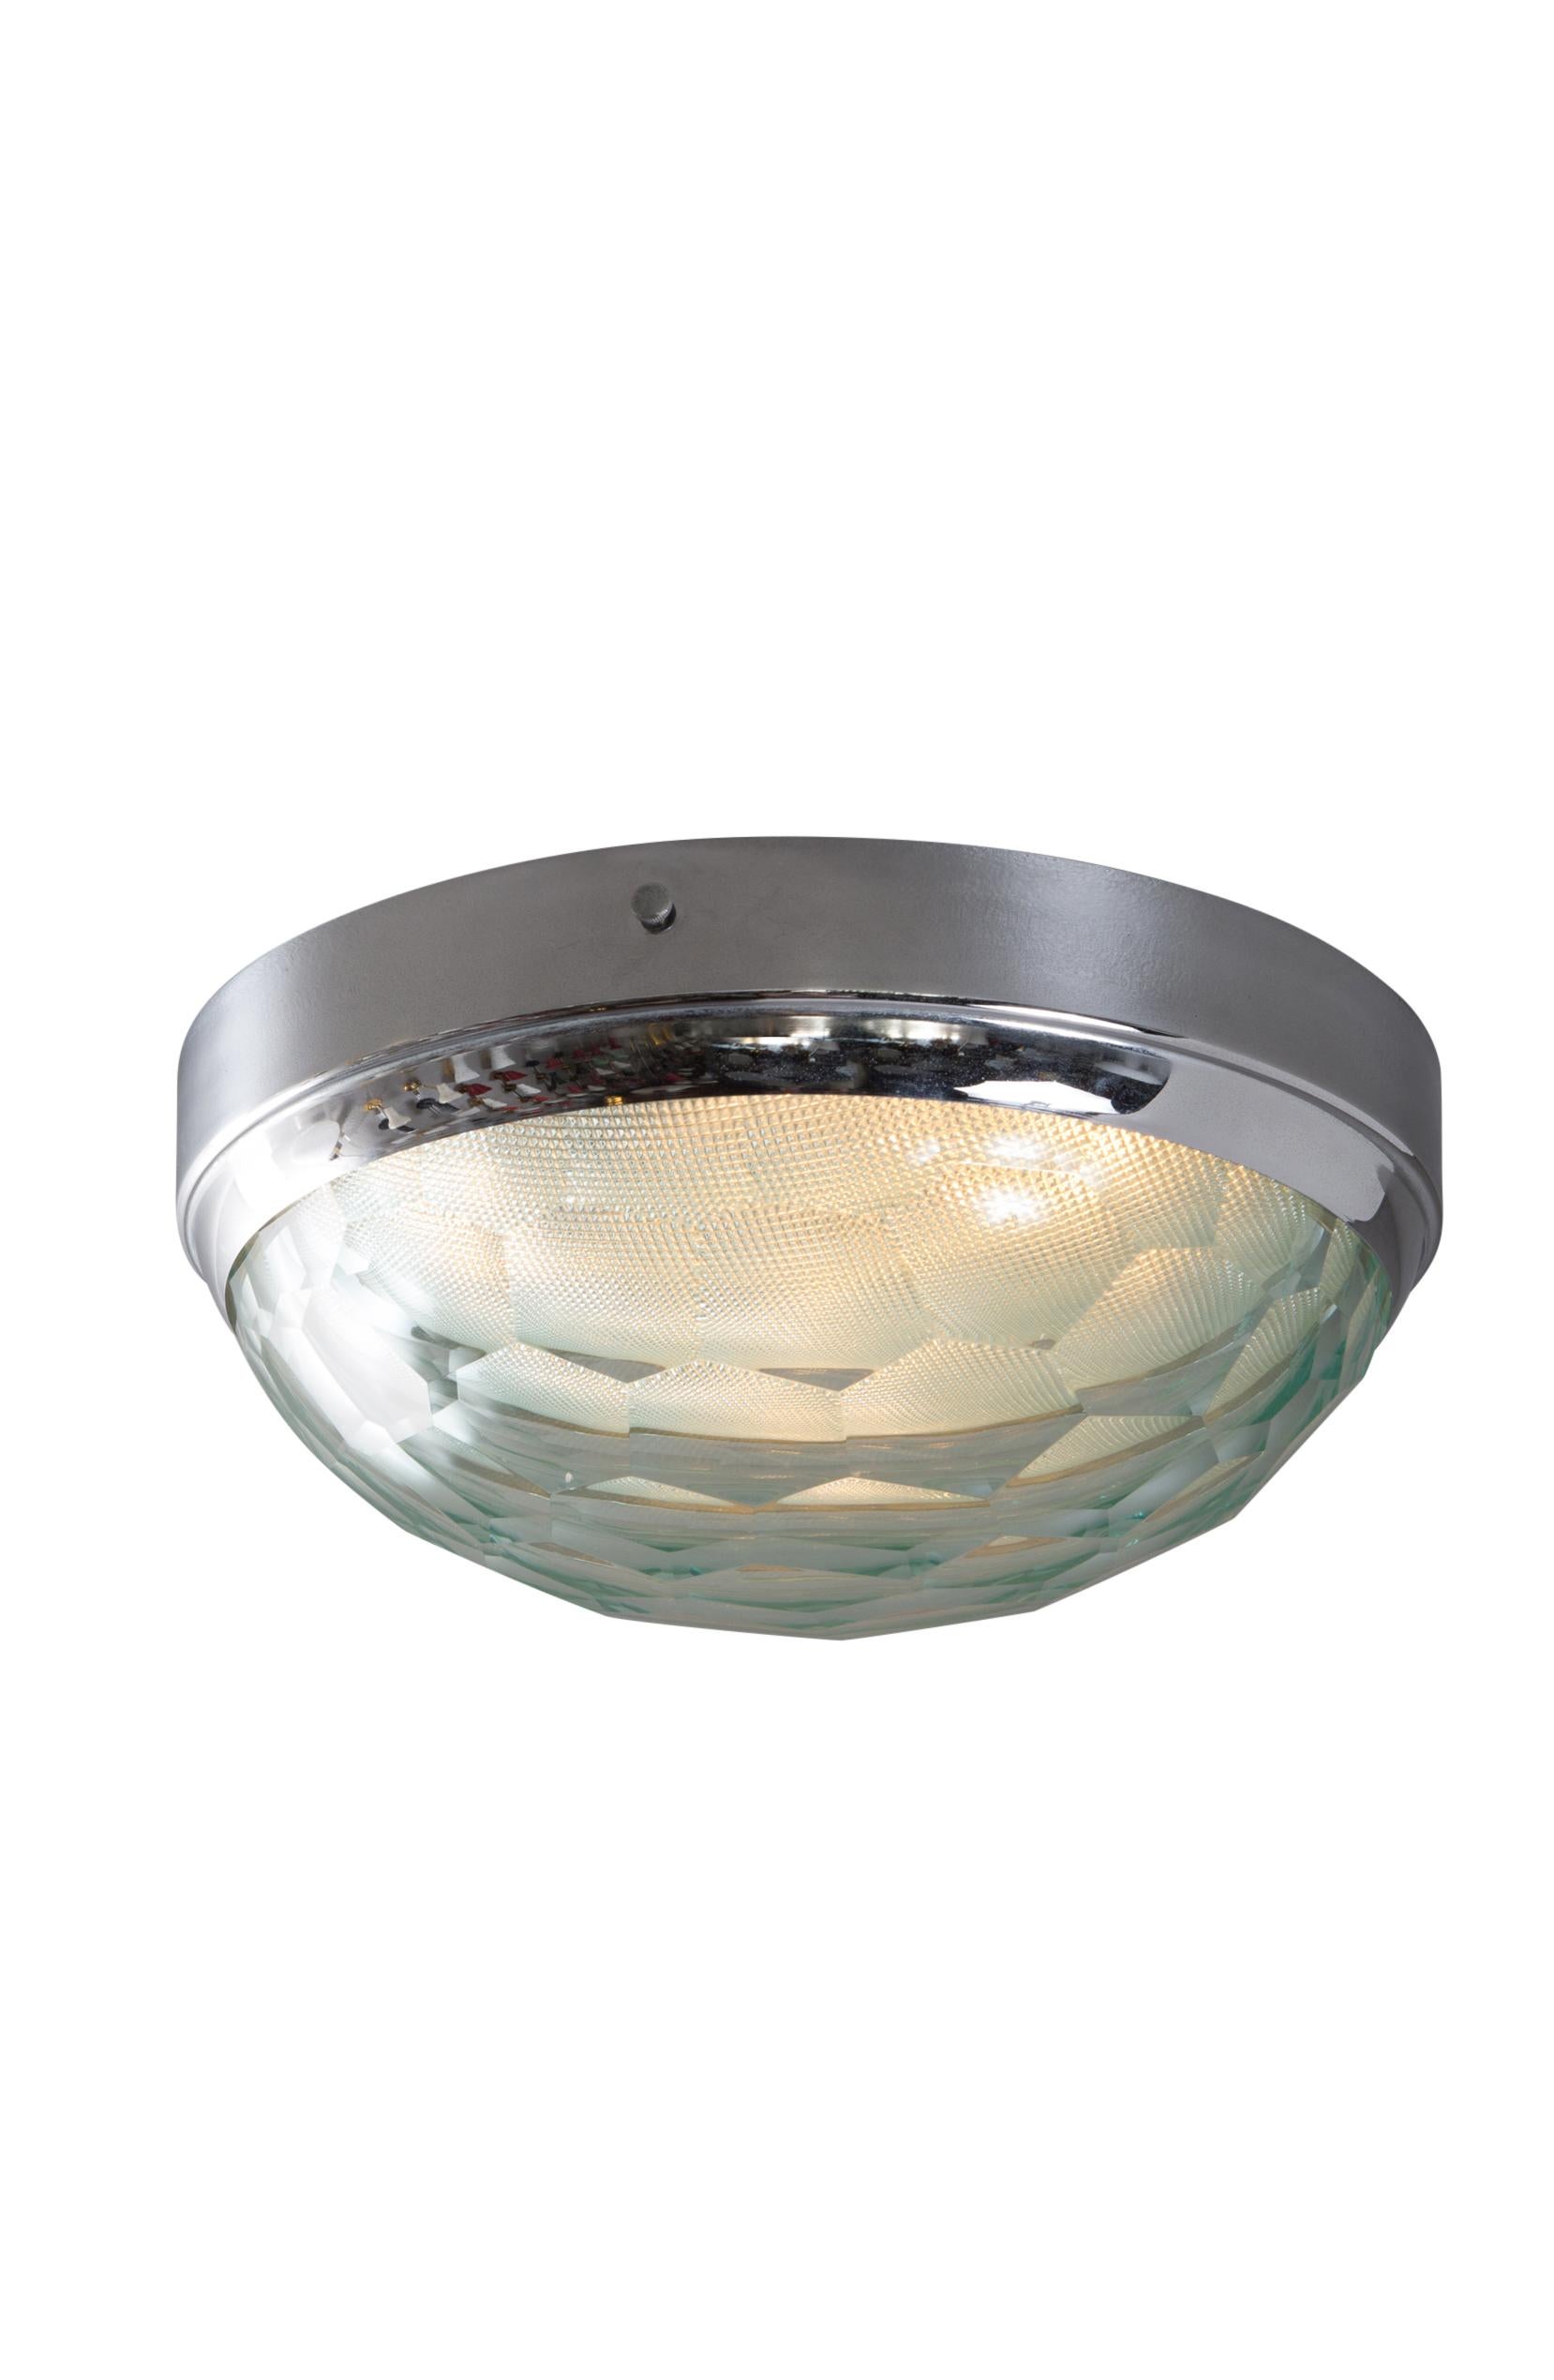 Large 1960s Pia Guidetti Crippa multifaceted wall or ceiling light for Lumi. Executed in chromed metal with two glass elements, a multifaceted outer glass and green tinted and textured inner glass. An incredibly sculptural and refined focal point of